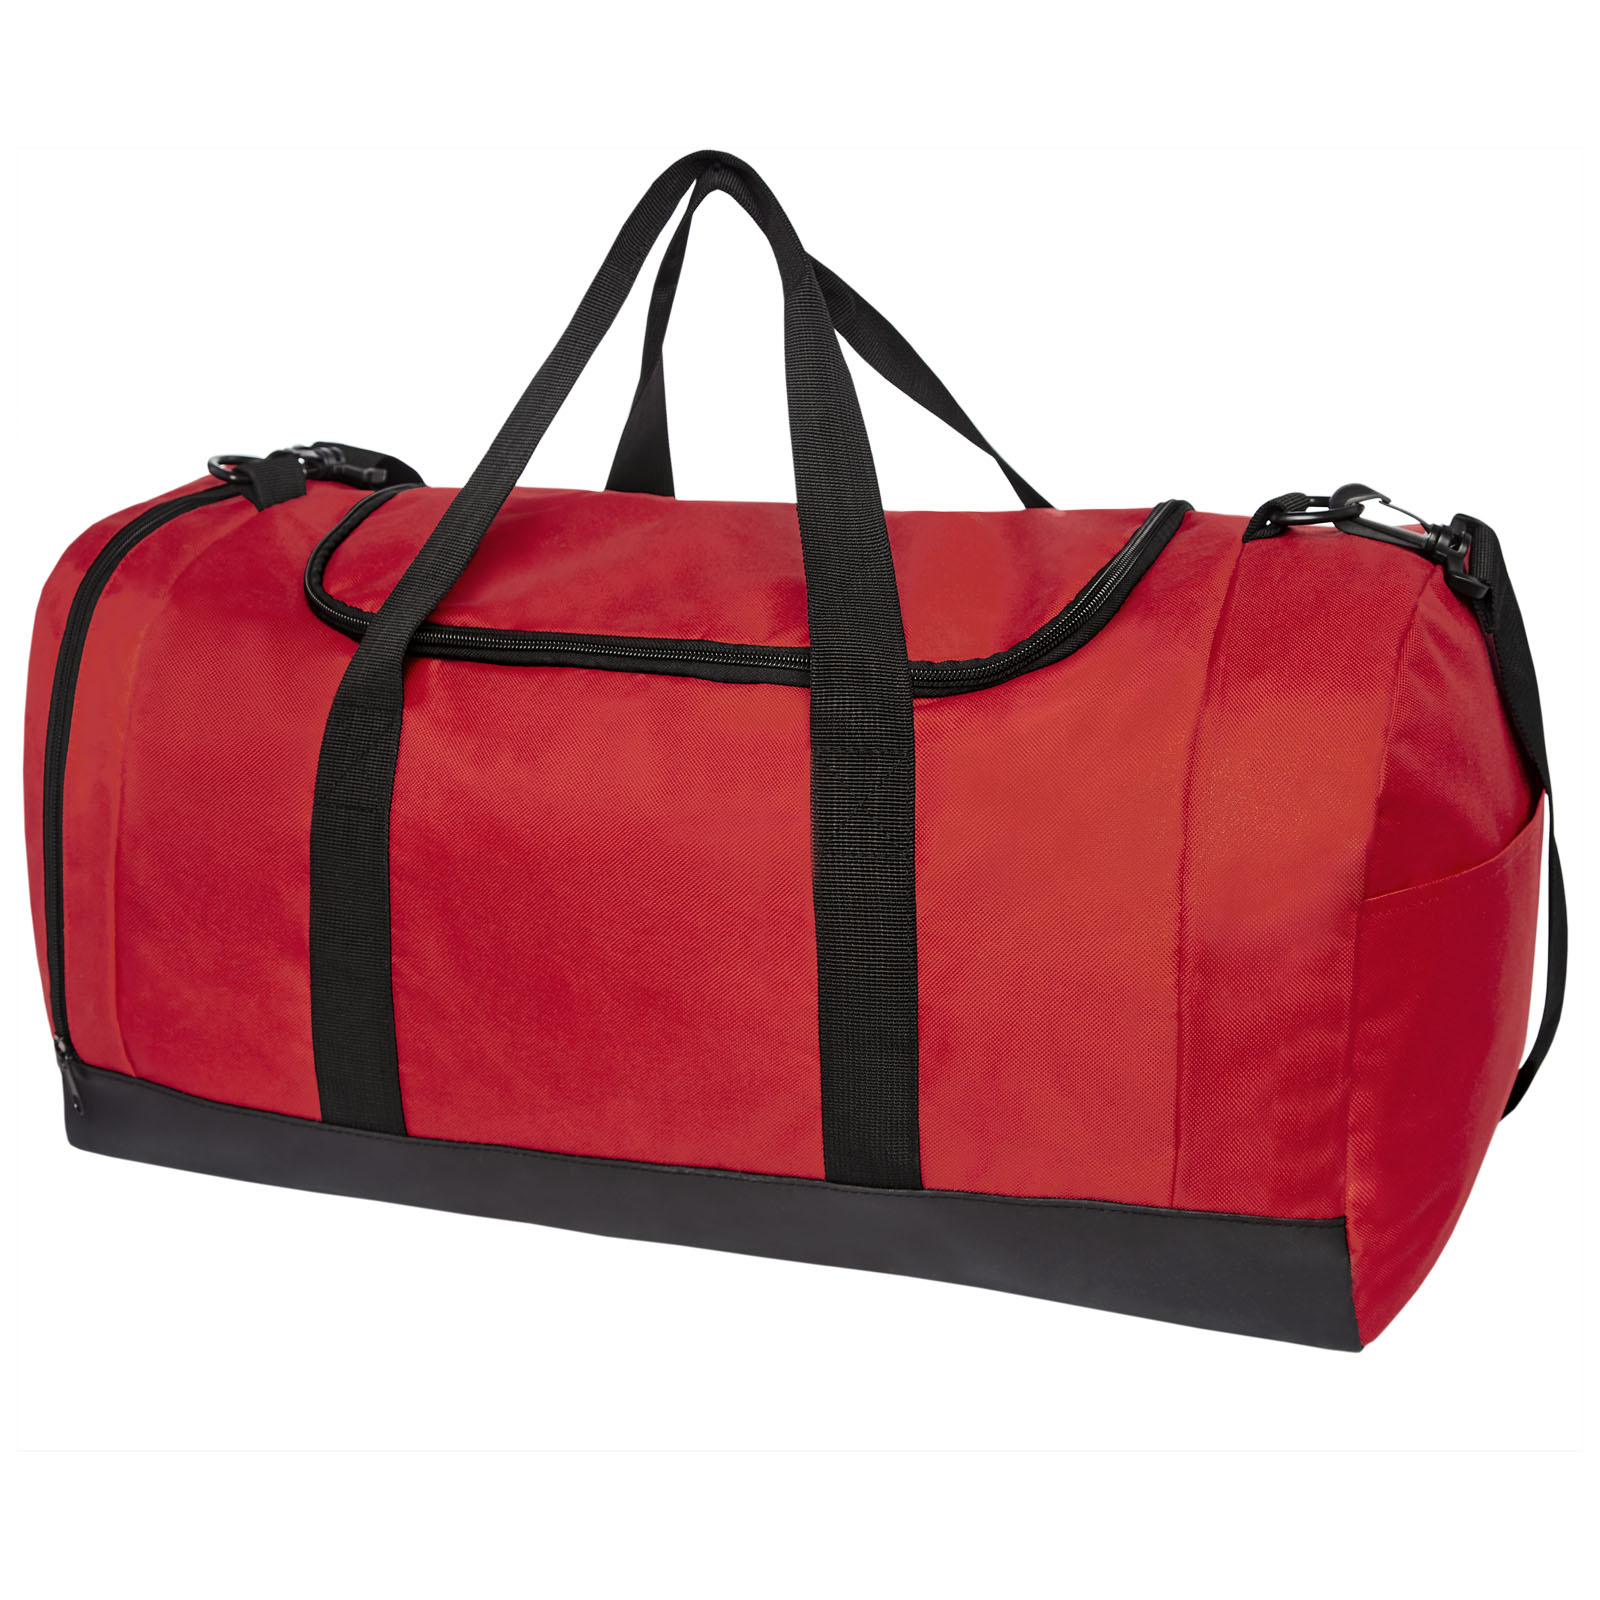 A duffel bag that can be expanded and is suitable for both wet and dry conditions, with a strengthened base. - Lye Green